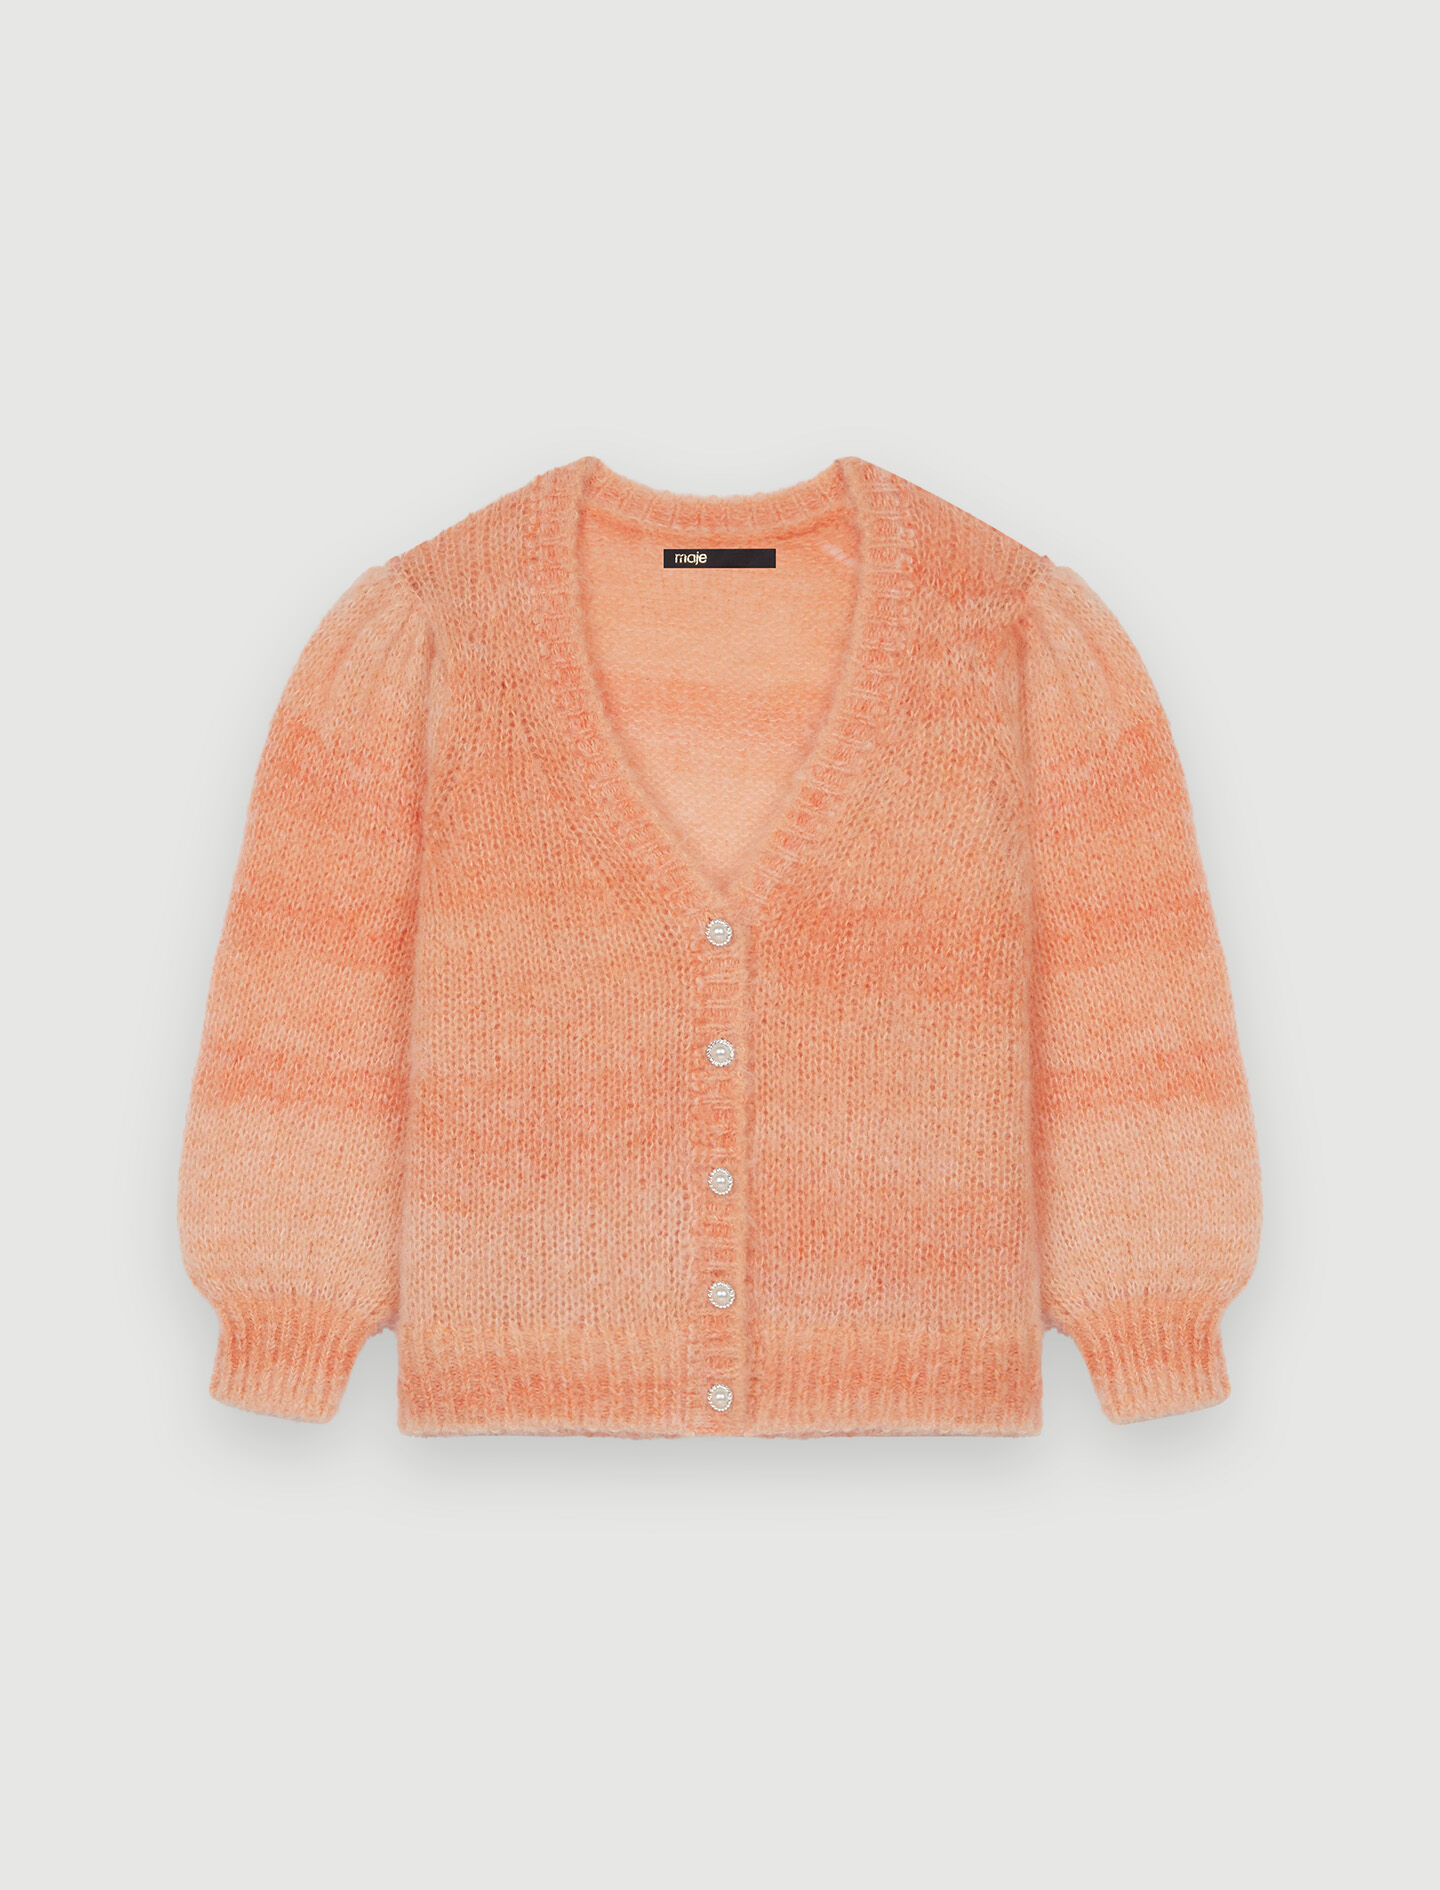 Maje Synthetic Fancy Knit Cardigan in Orange Womens Clothing Jumpers and knitwear Cardigans 